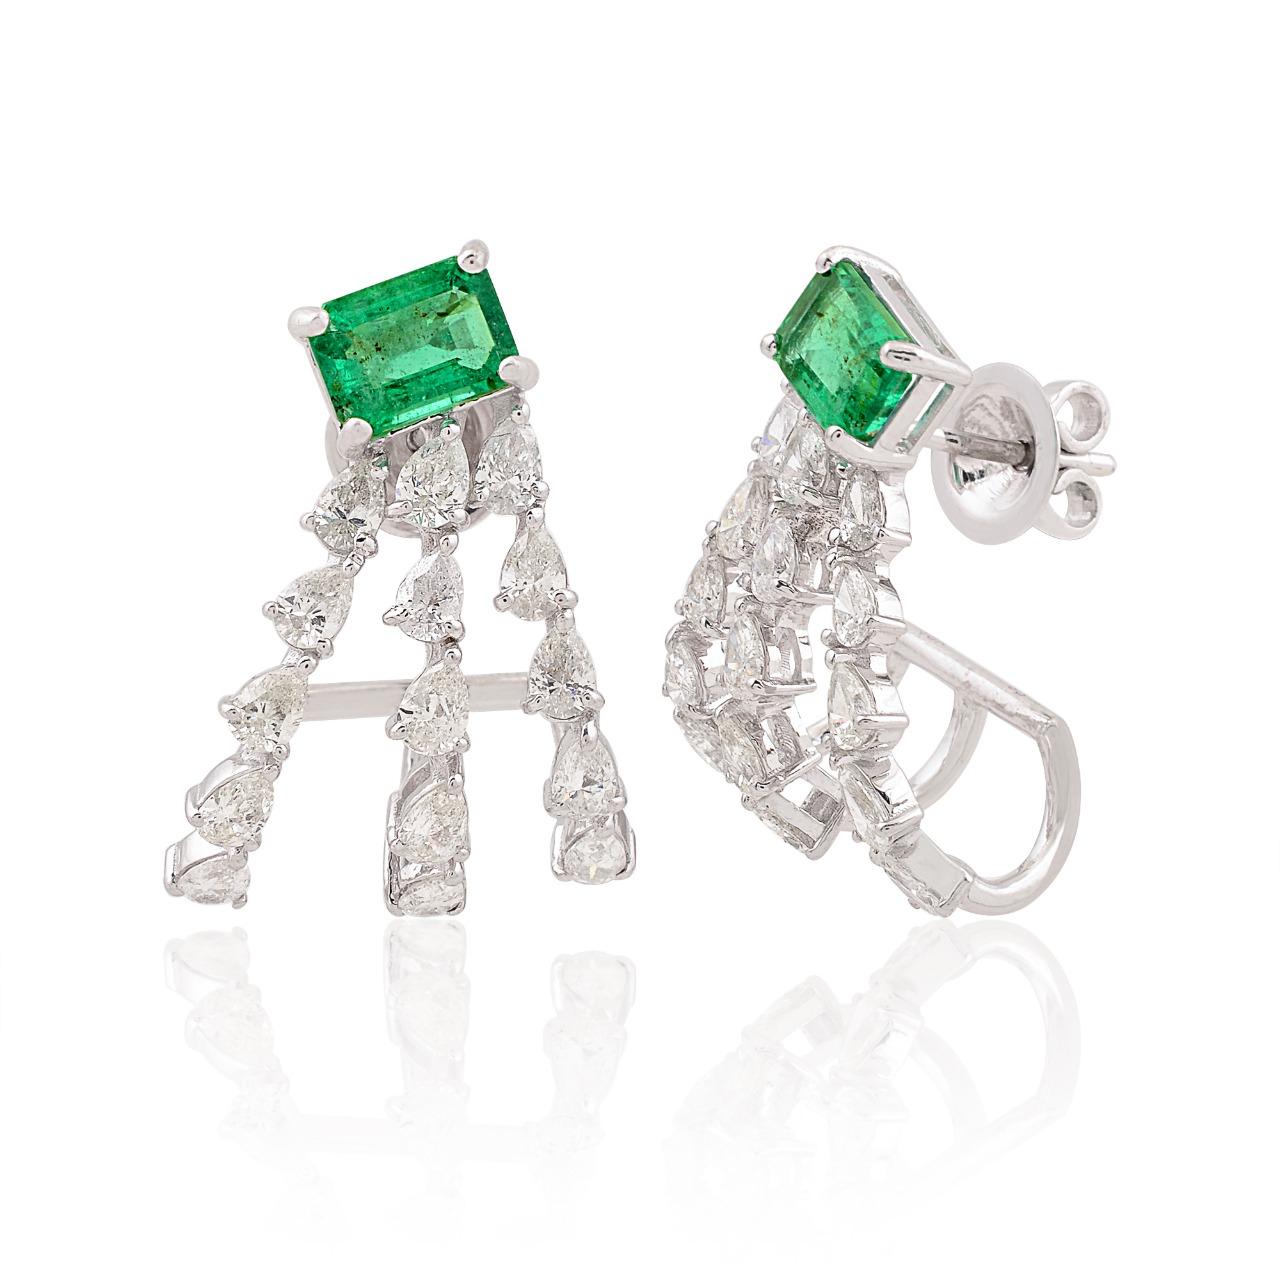 Cast in 14-karat gold, these beautiful hoop earrings are hand set with 4.13 carats of emerald and 2.21 carats of sparkling diamonds. 

FOLLOW  MEGHNA JEWELS storefront to view the latest collection & exclusive pieces.  Meghna Jewels is proudly rated